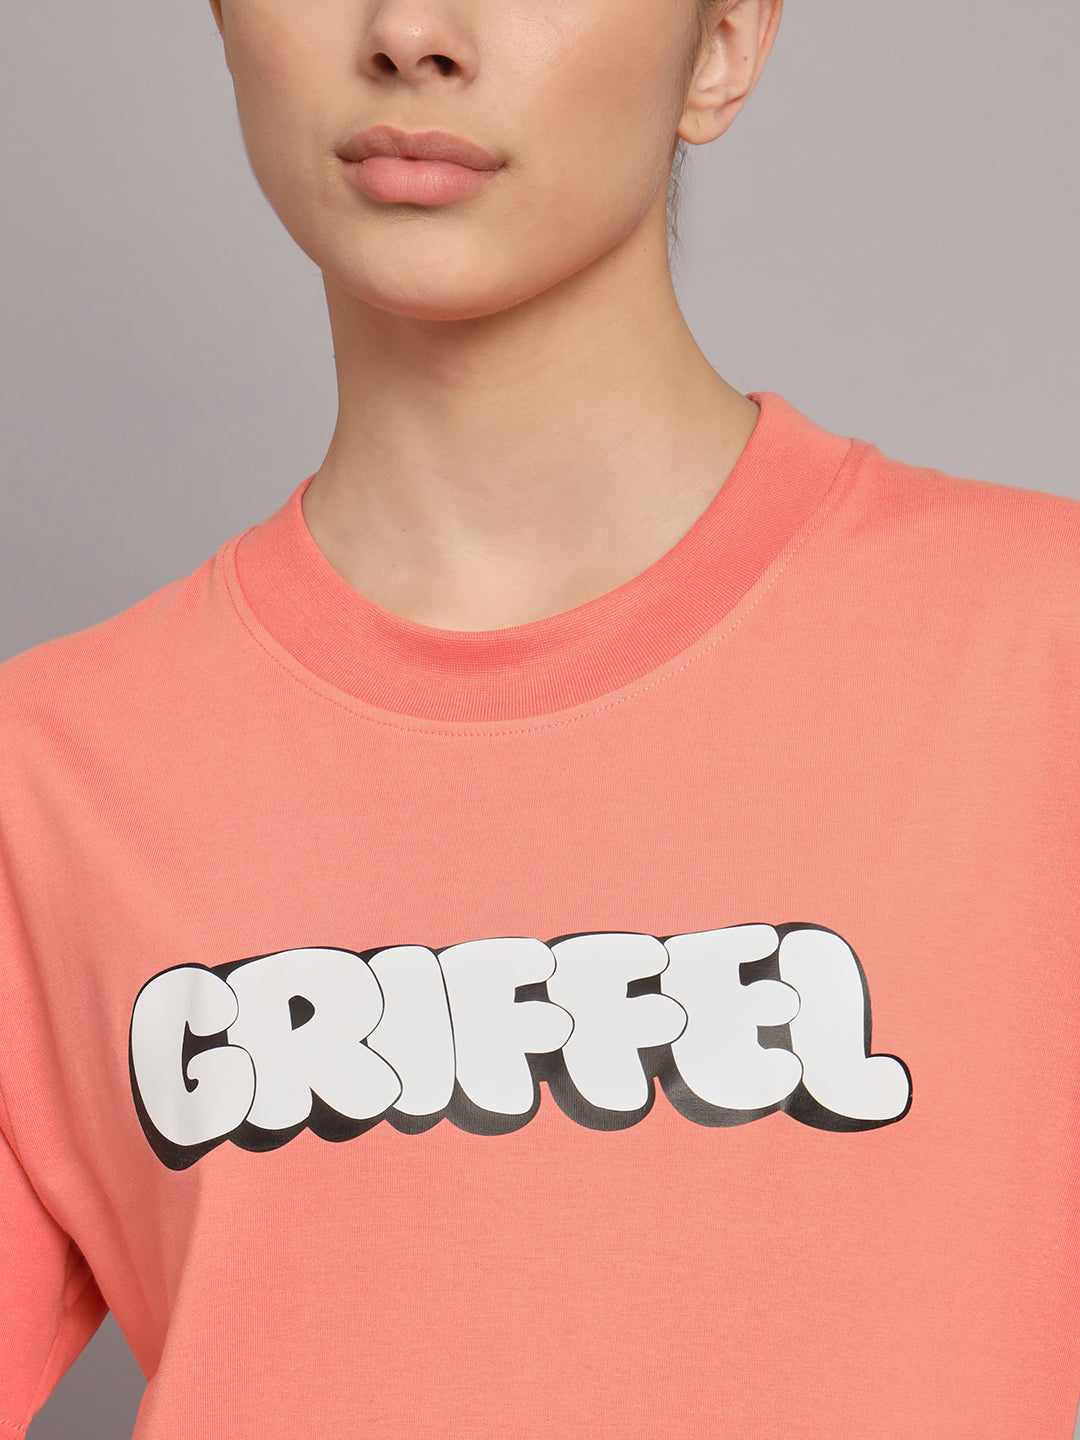 GRIFFEL Women Printed Loose fit Peach T-shirt - griffel